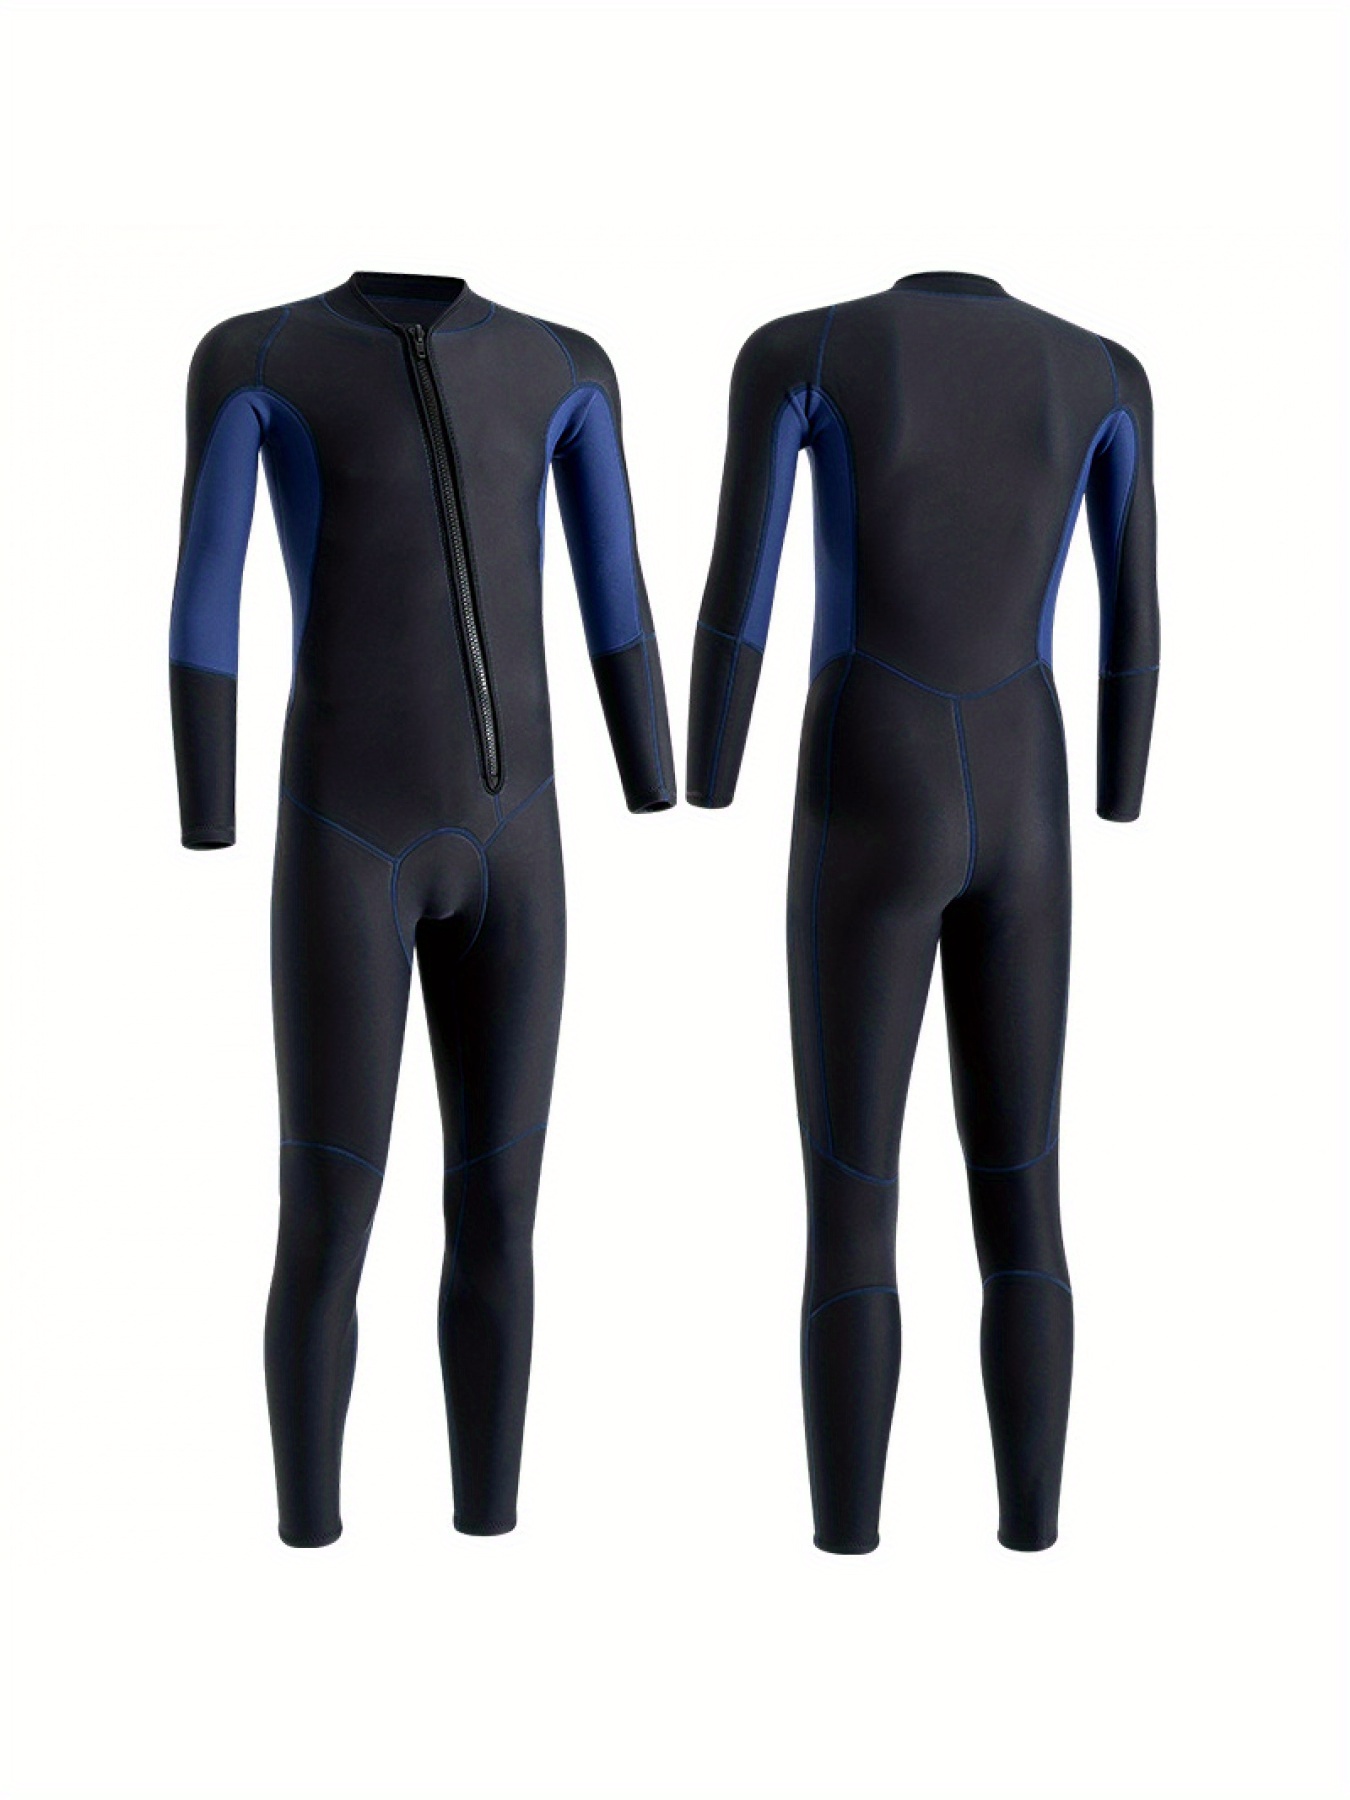 Realon Wetsuit Men Full 3mm Surfing Suit Diving Snorkeling Swimming Suit,  Wetsuits -  Canada